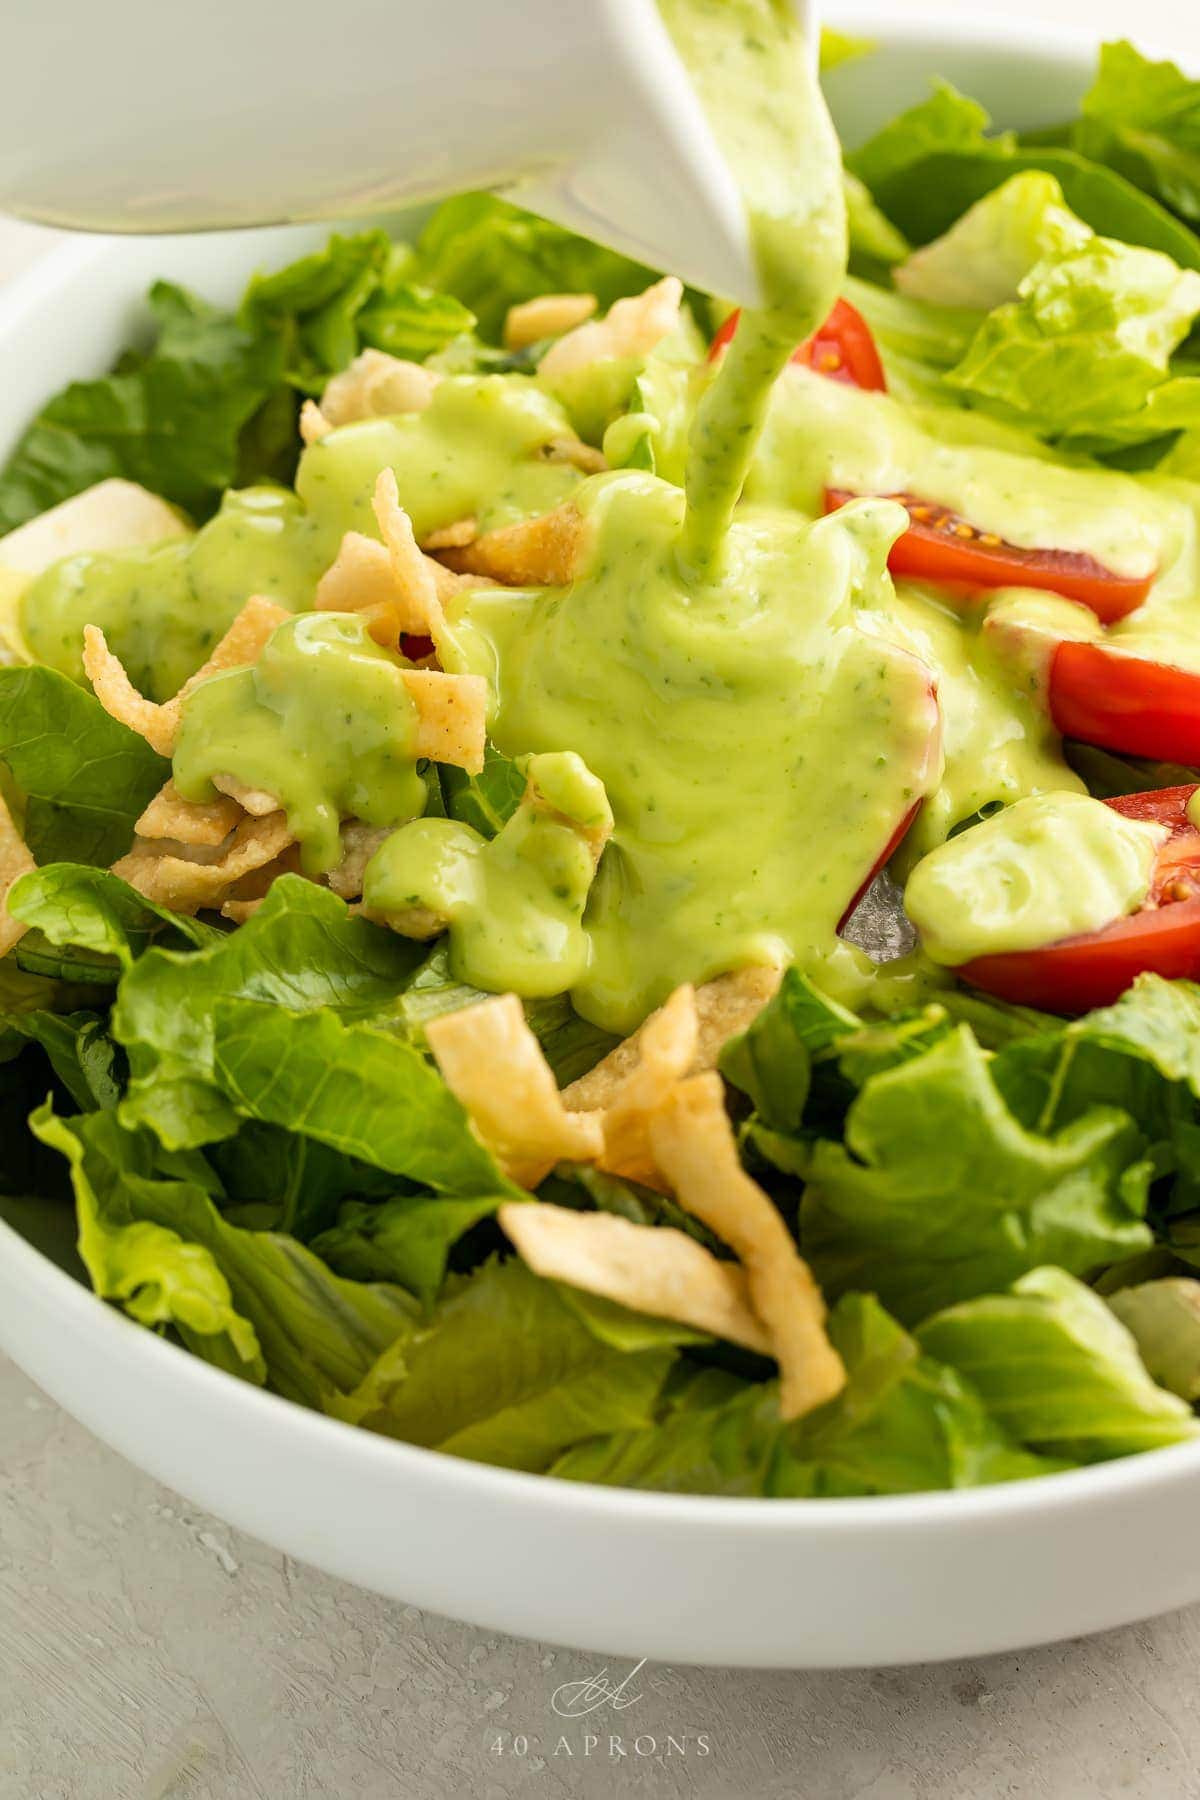 Avocado dressing poured over a salad in a bowl